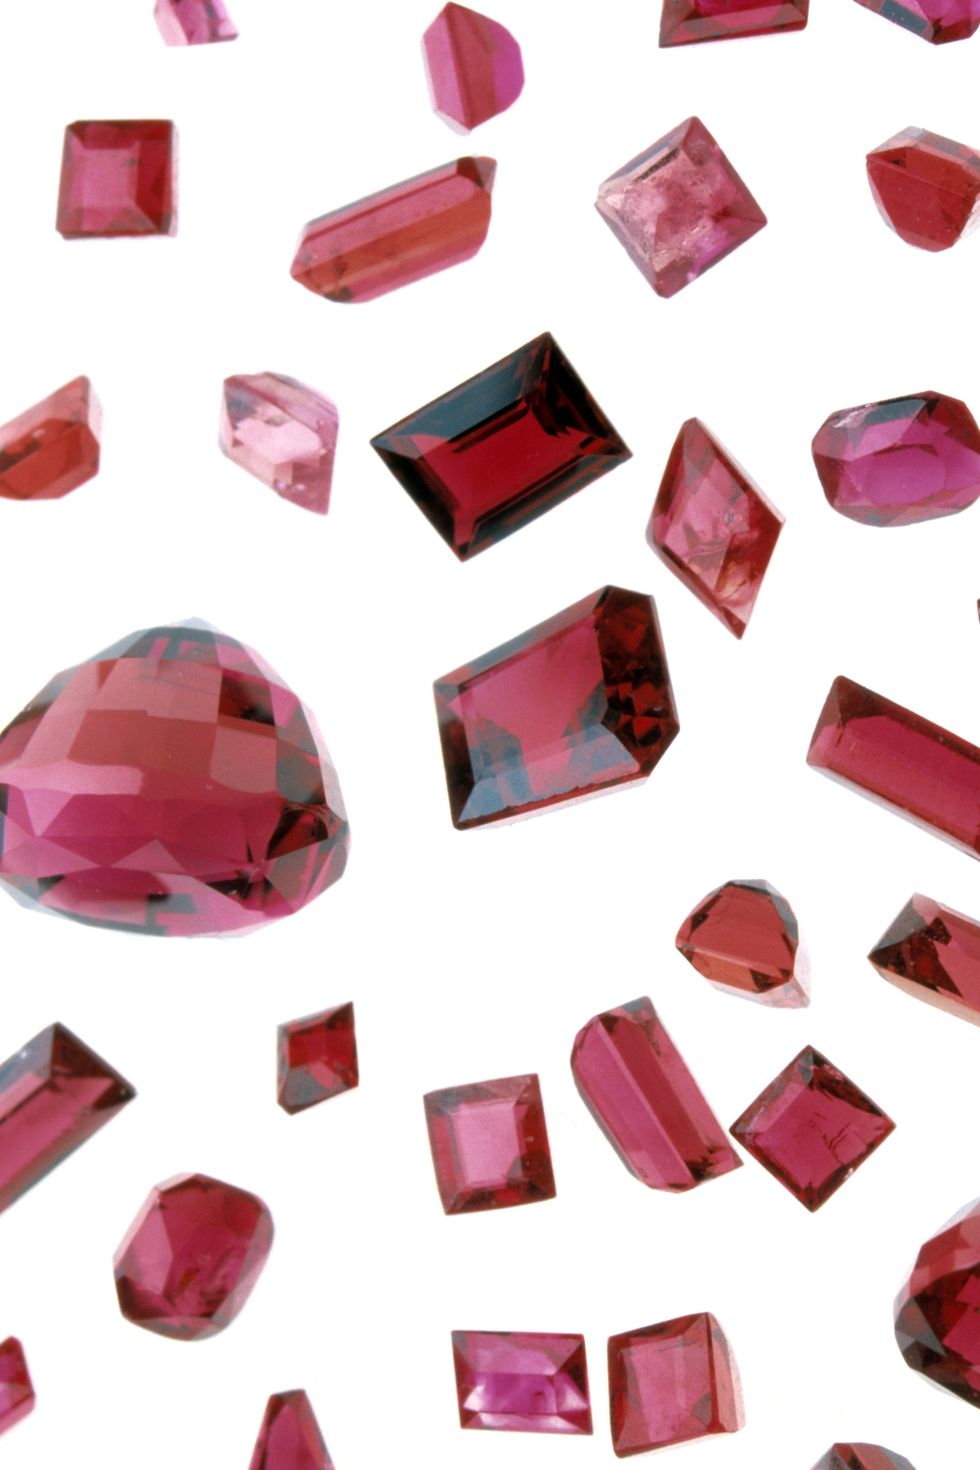 <p>Most people think <a href="https://www.lilbabycakes.com/blog/fun-facts-about-january-born-babies/"><u data-redactor-tag="u">garnets</u></a> are always red, but the precious stone can actually come in a variety of colours. Better yet, garnets are said to symbolise peace, prosperity, and health. January babies who wear the stone can look forward to "eternal happiness, health, and wealth," according to some legends.&nbsp;<span class="redactor-invisible-space" data-verified="redactor" data-redactor-tag="span" data-redactor-class="redactor-invisible-space"></span></p>